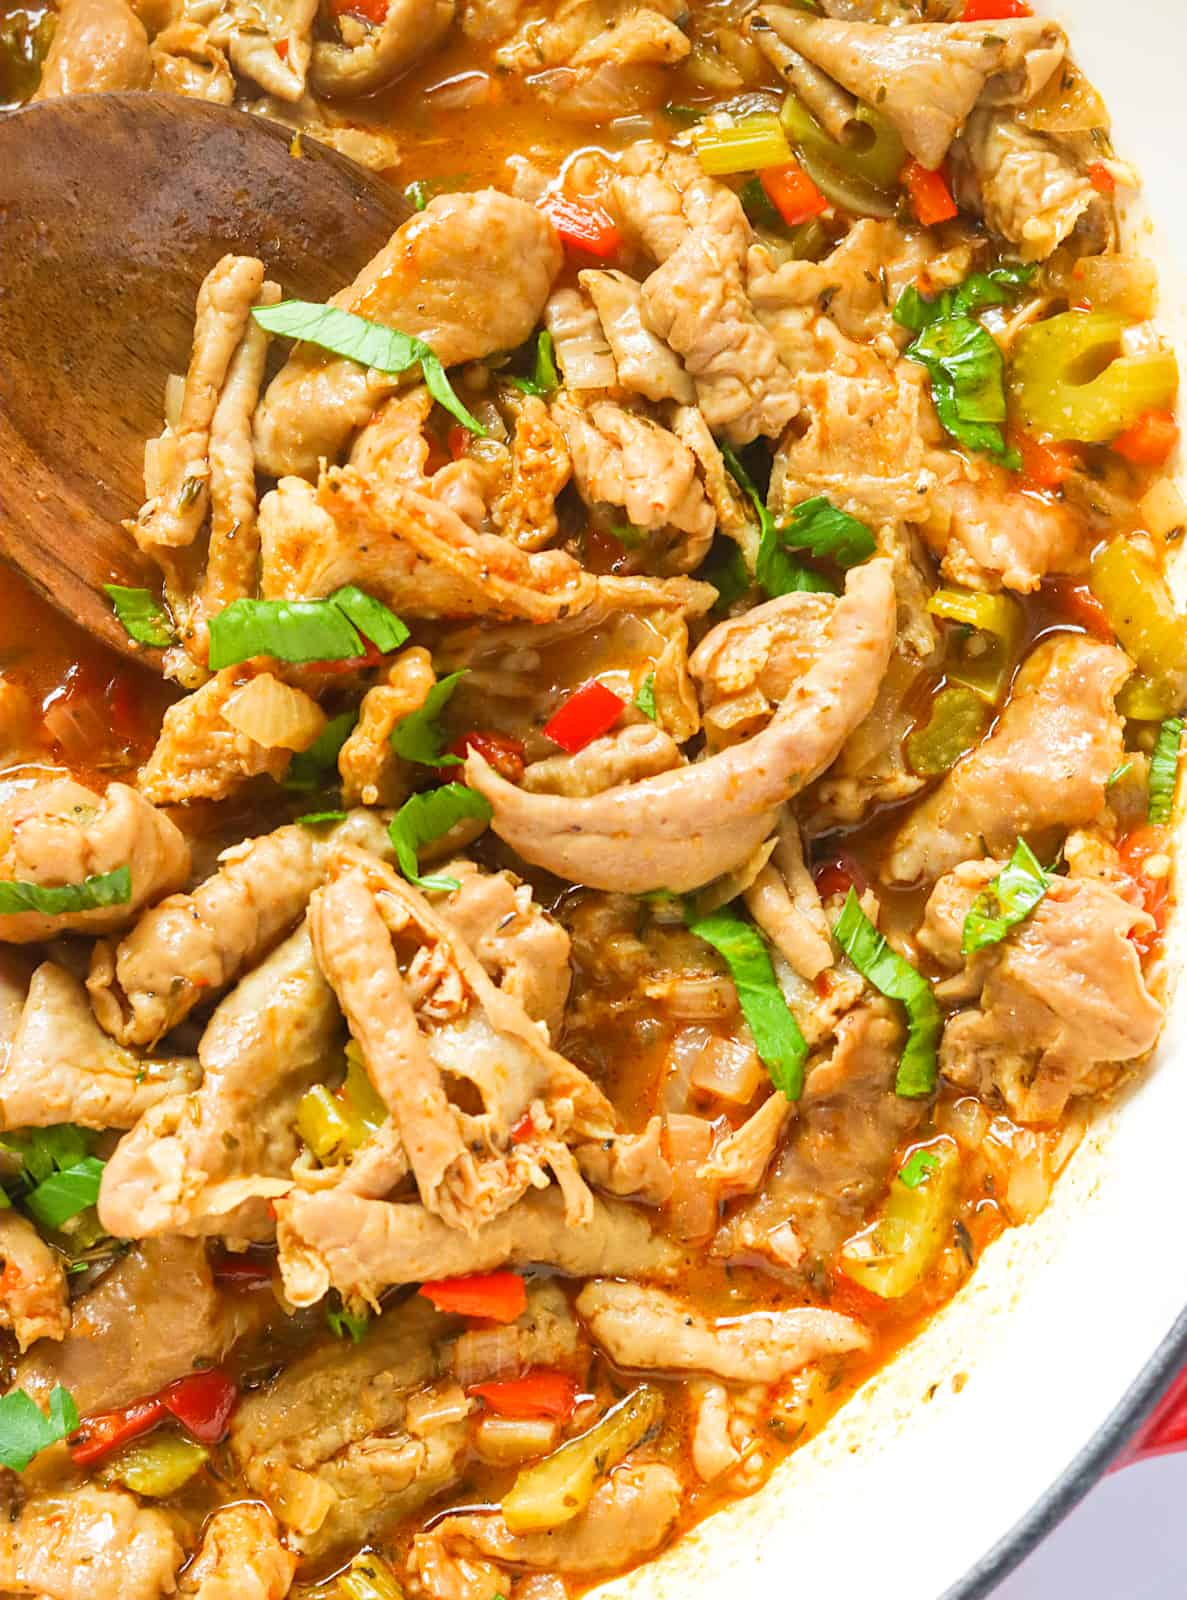 Cooked Pork Chitterlings